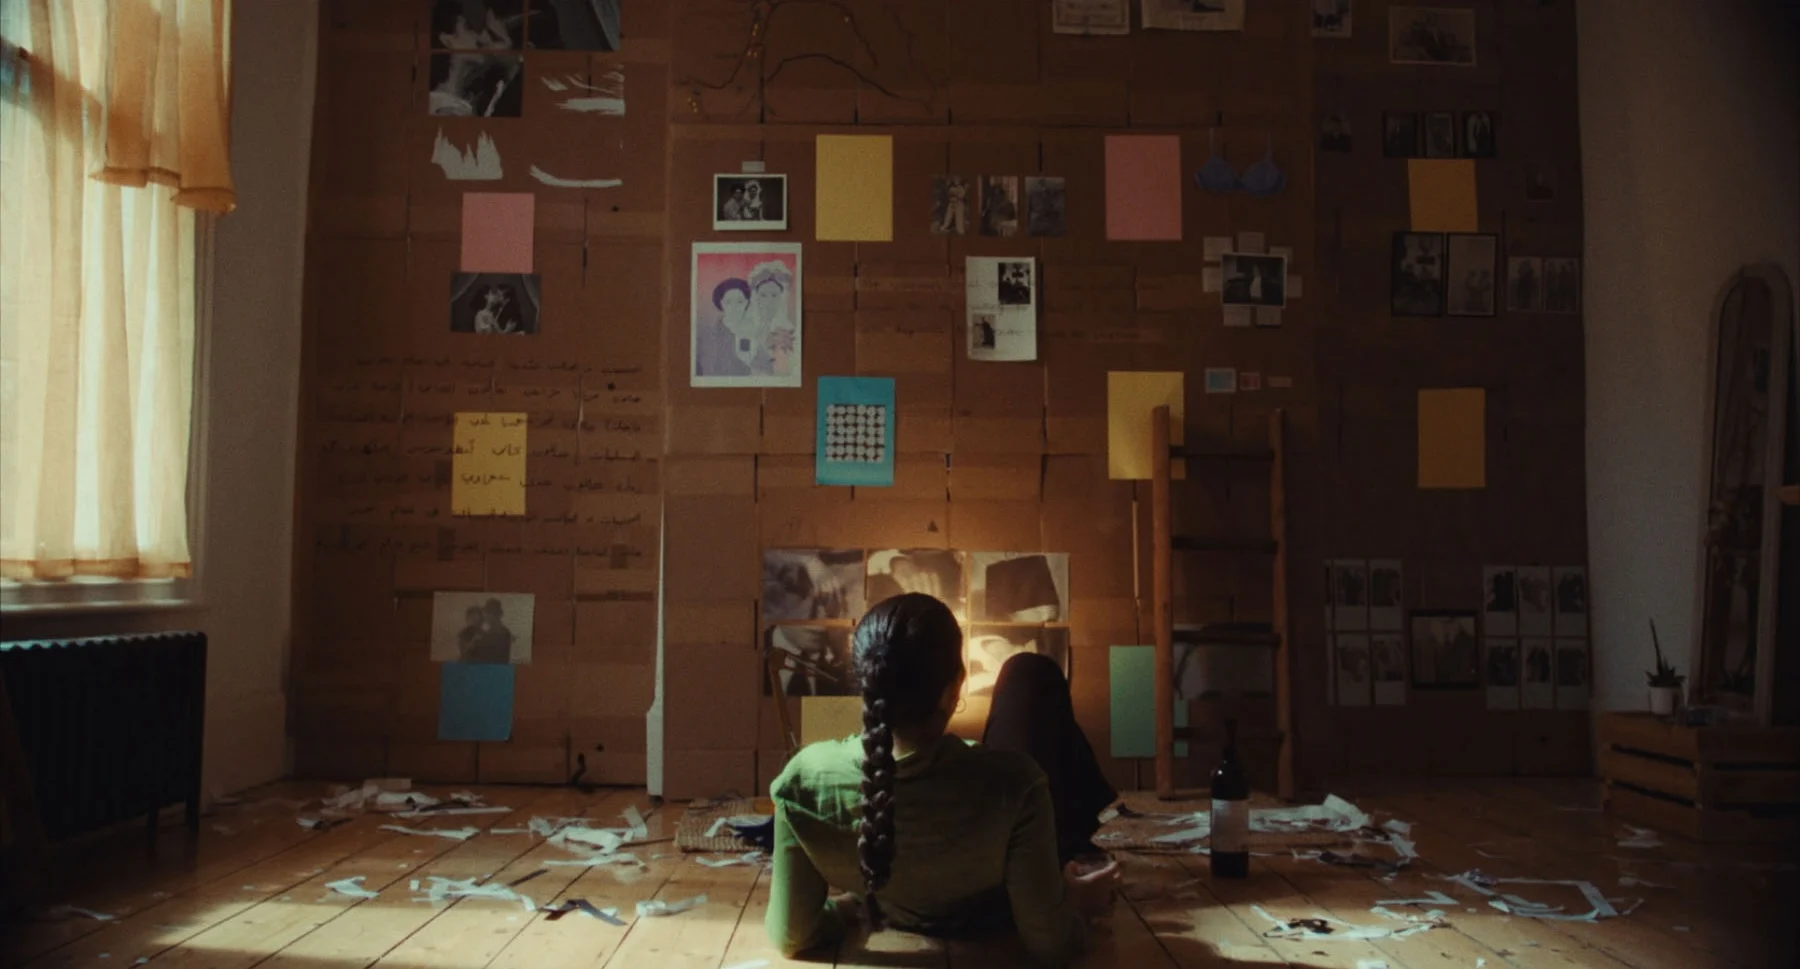 A still from the film Neo Nahda by May Ziade. The still shows a young woman sitting on the floor of her very messy room. One of her walls is fully covered by cardboard and miscellaneous “evidence” of Arab queer and feminist photographic histories of the early 20th century. 
